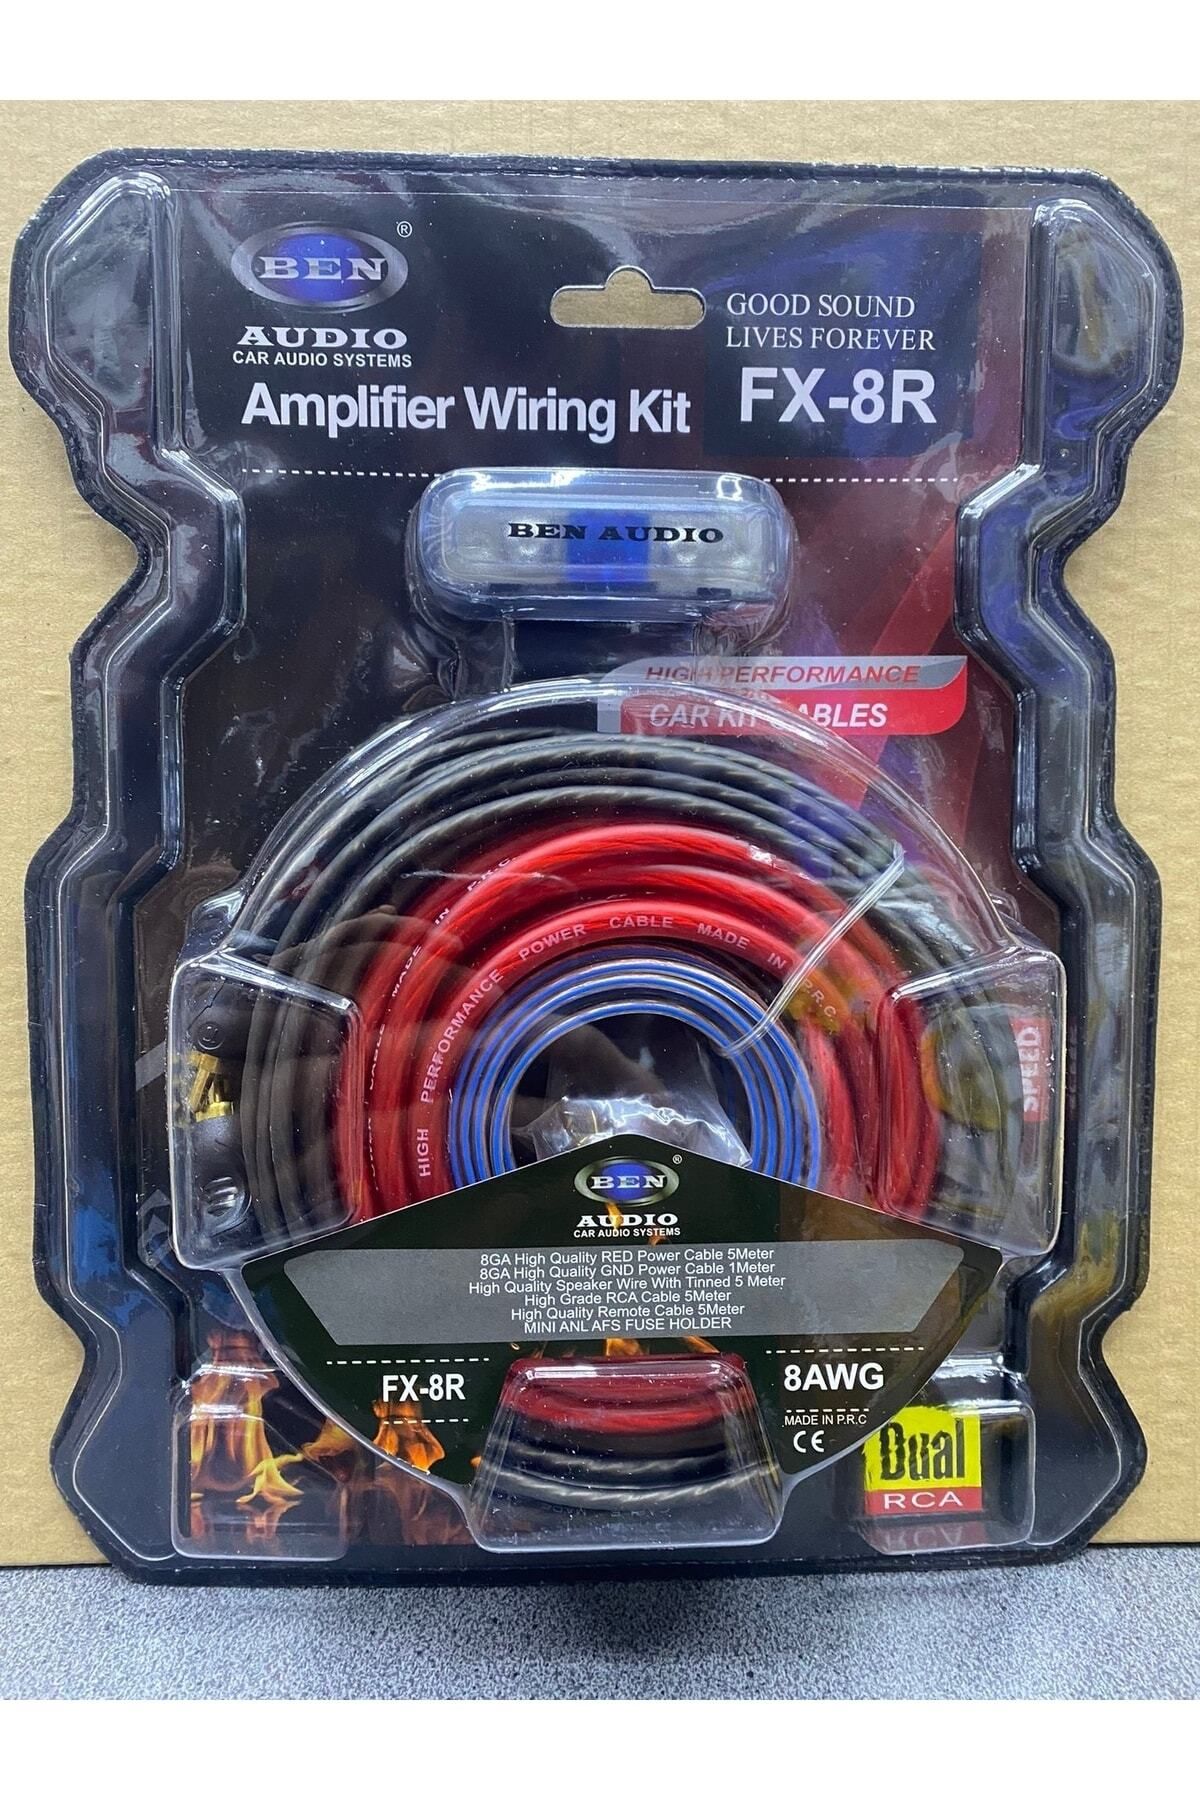 Audiomax Bm Audio 8awg Cable Set Installation Cable Set This Set